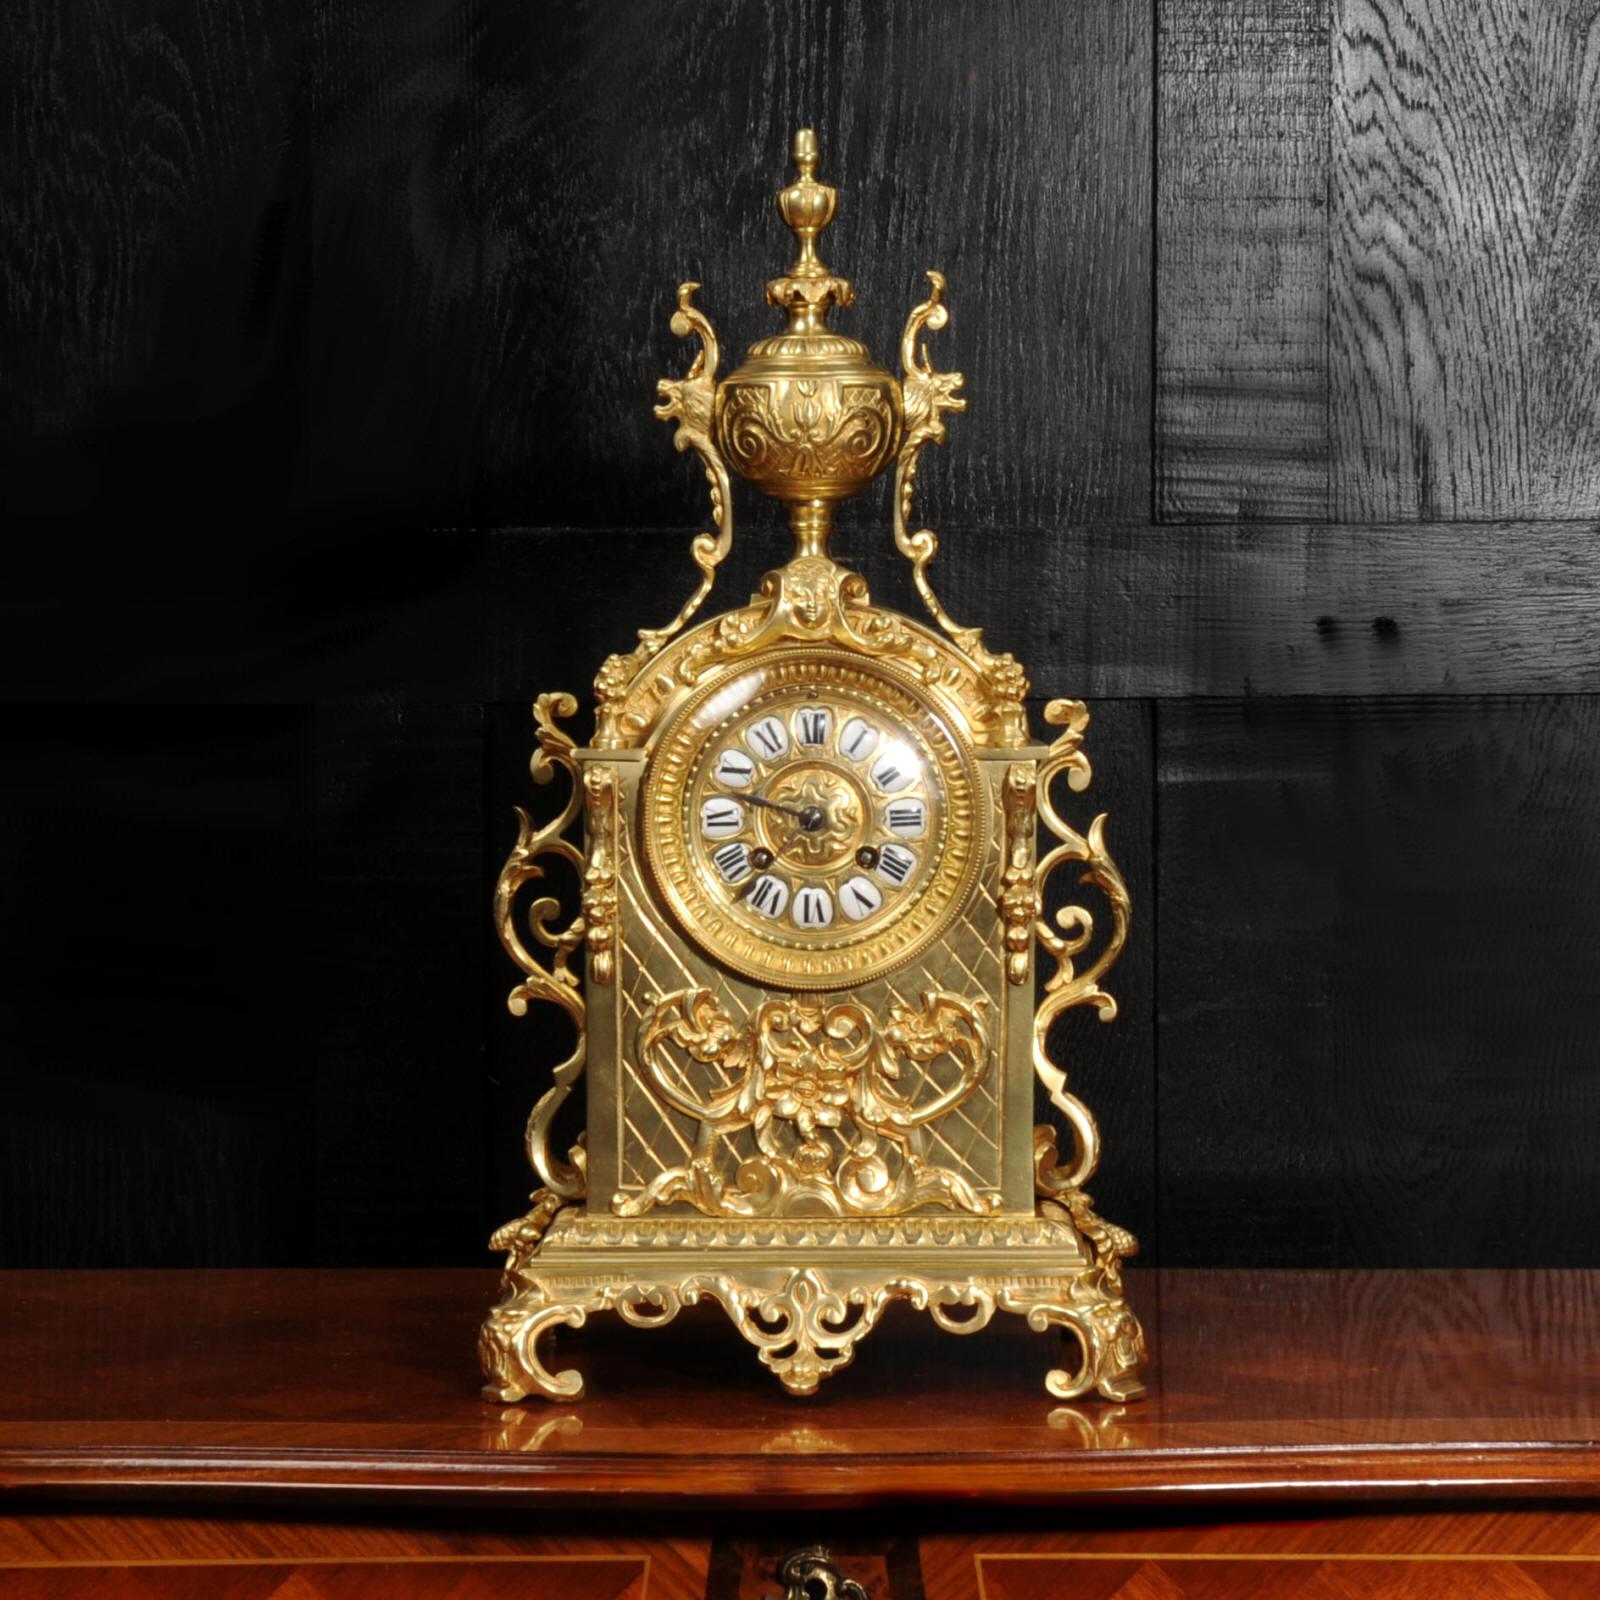 A beautiful original antique French clock, modelled in the Baroque style in gilt bronze. It is of architectural form with an applied motif of flowers, scrolls and cornucopia. Scrolling brackets are mounted to the sides and an urn with mythical